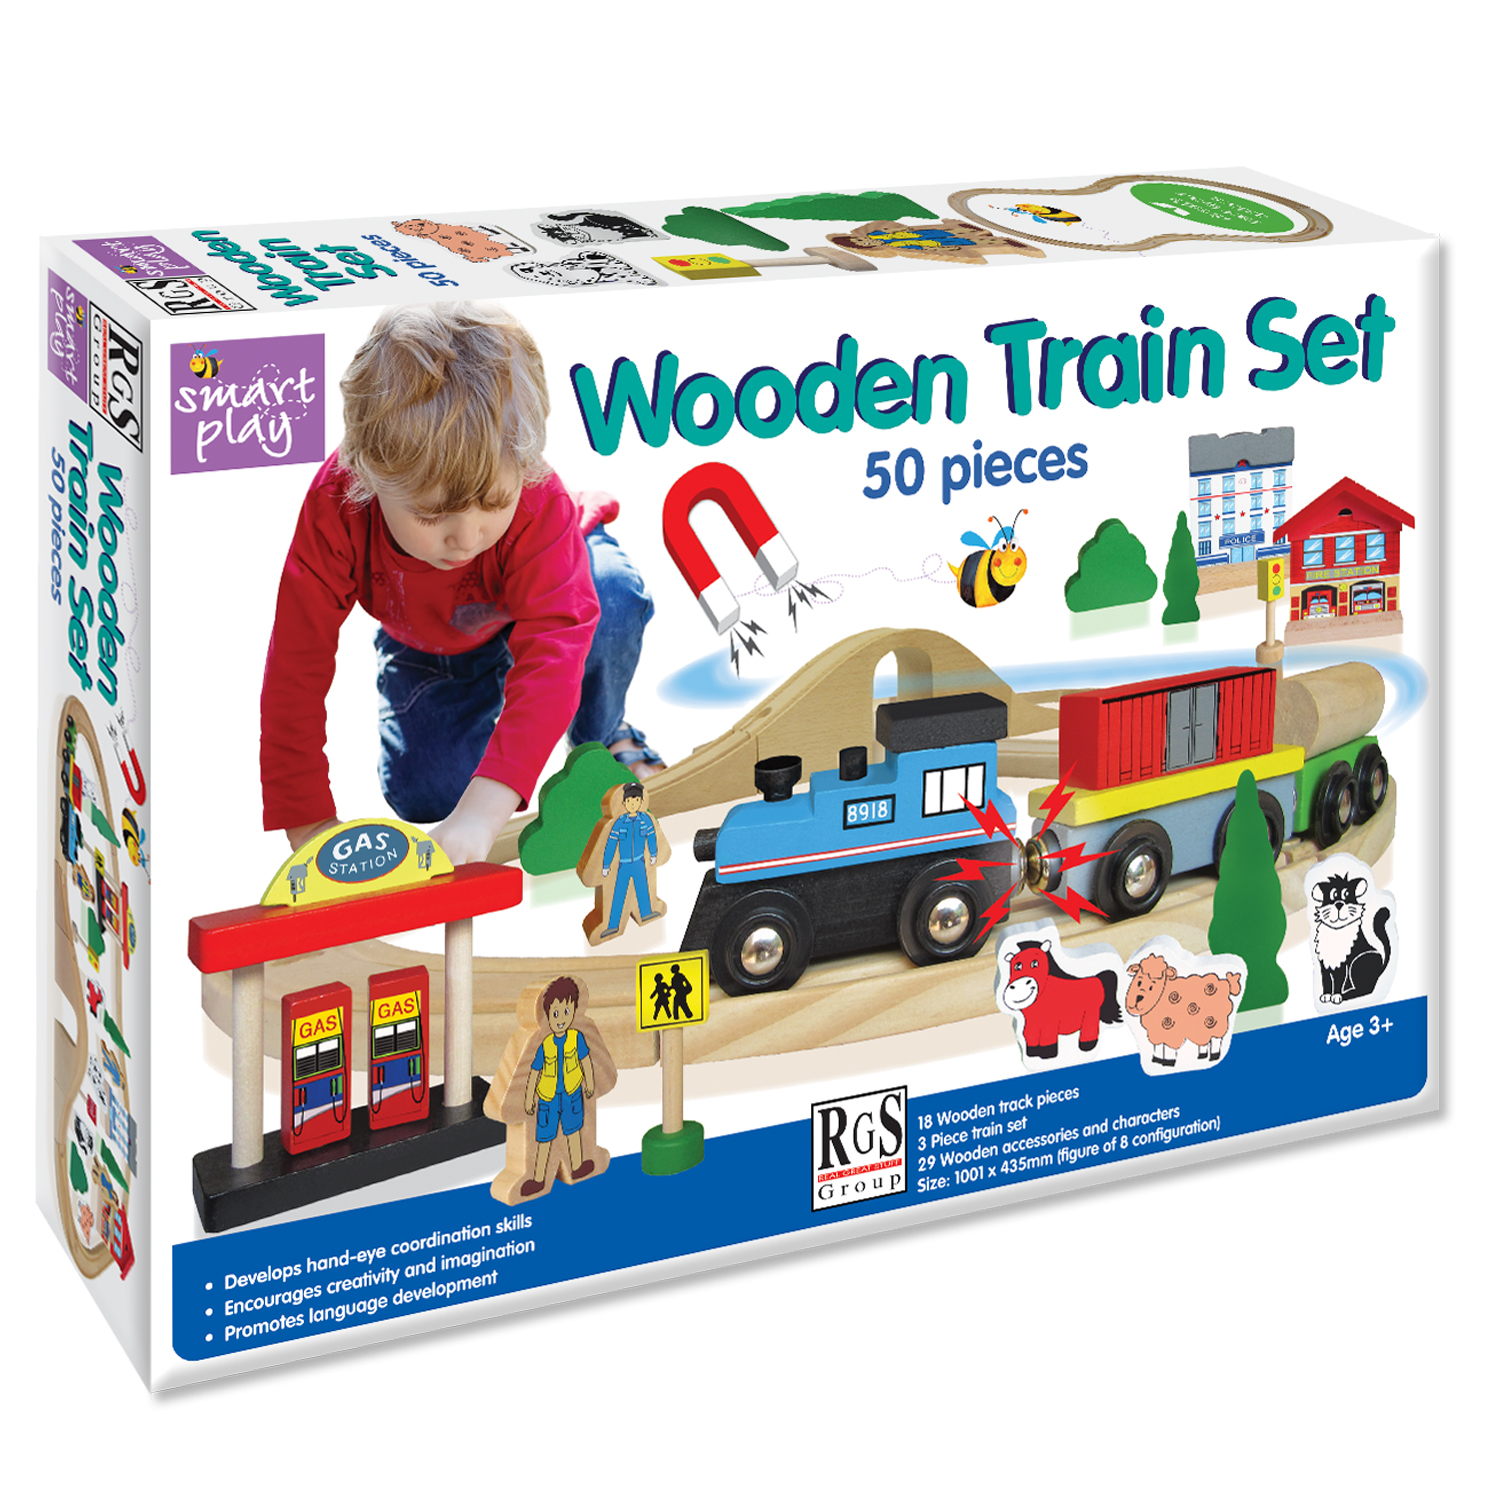 box cotains 50 wooden pieces for this fun train set